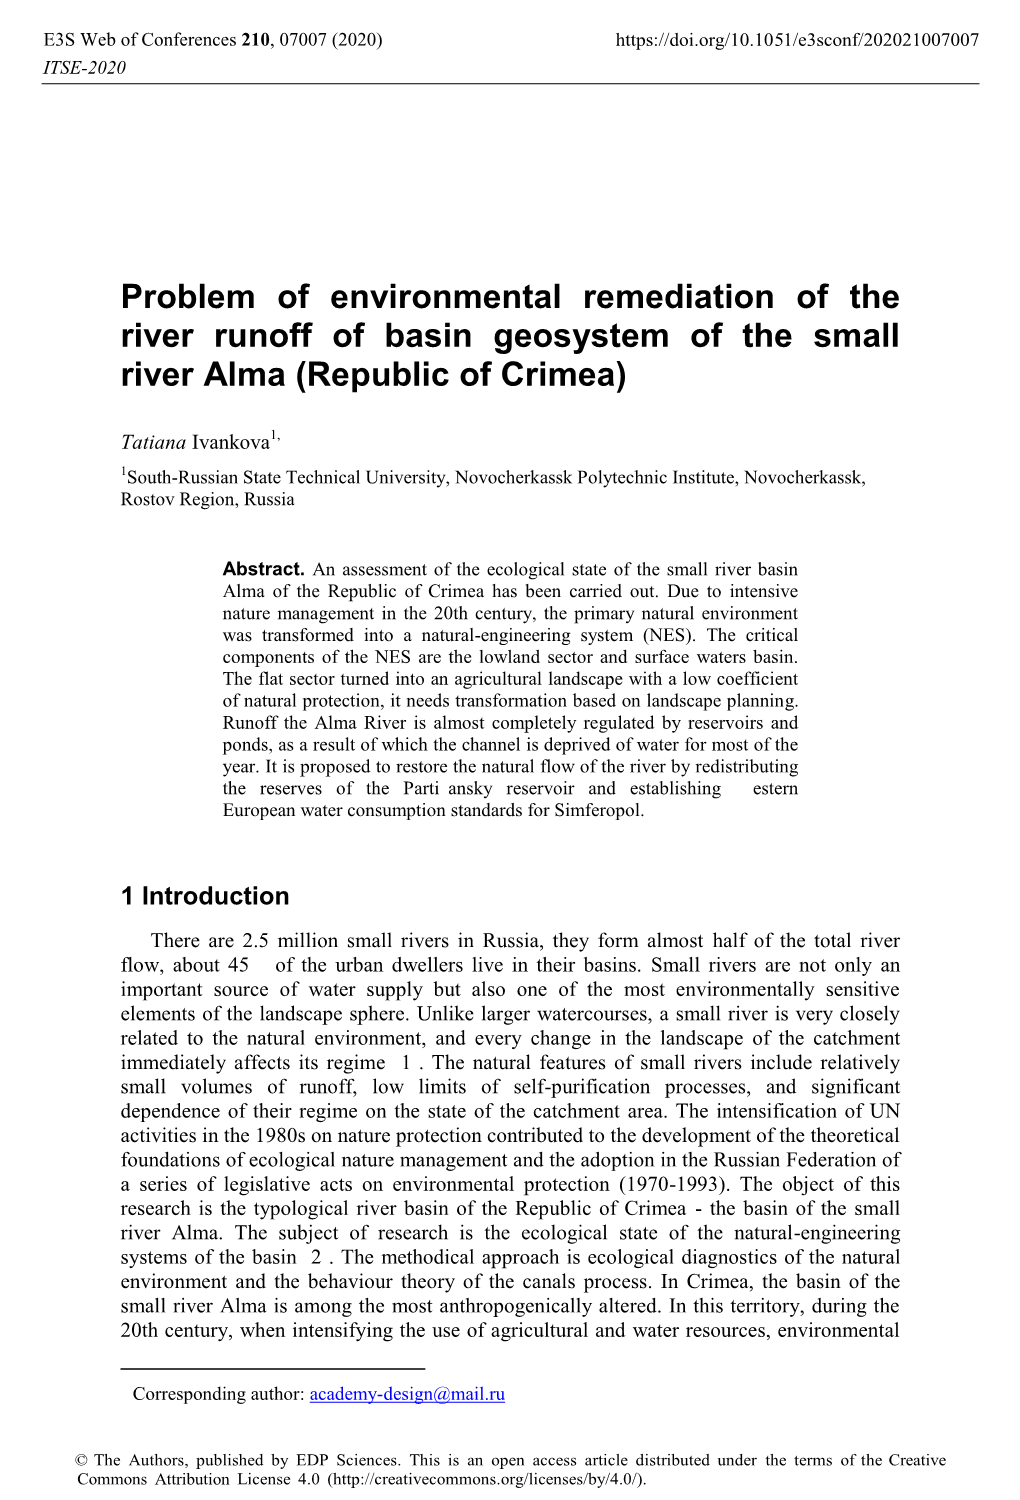 Problem of Environmental Remediation of the River Runoff of Basin Geosystem of the Small River Alma (Republic of Crimea)